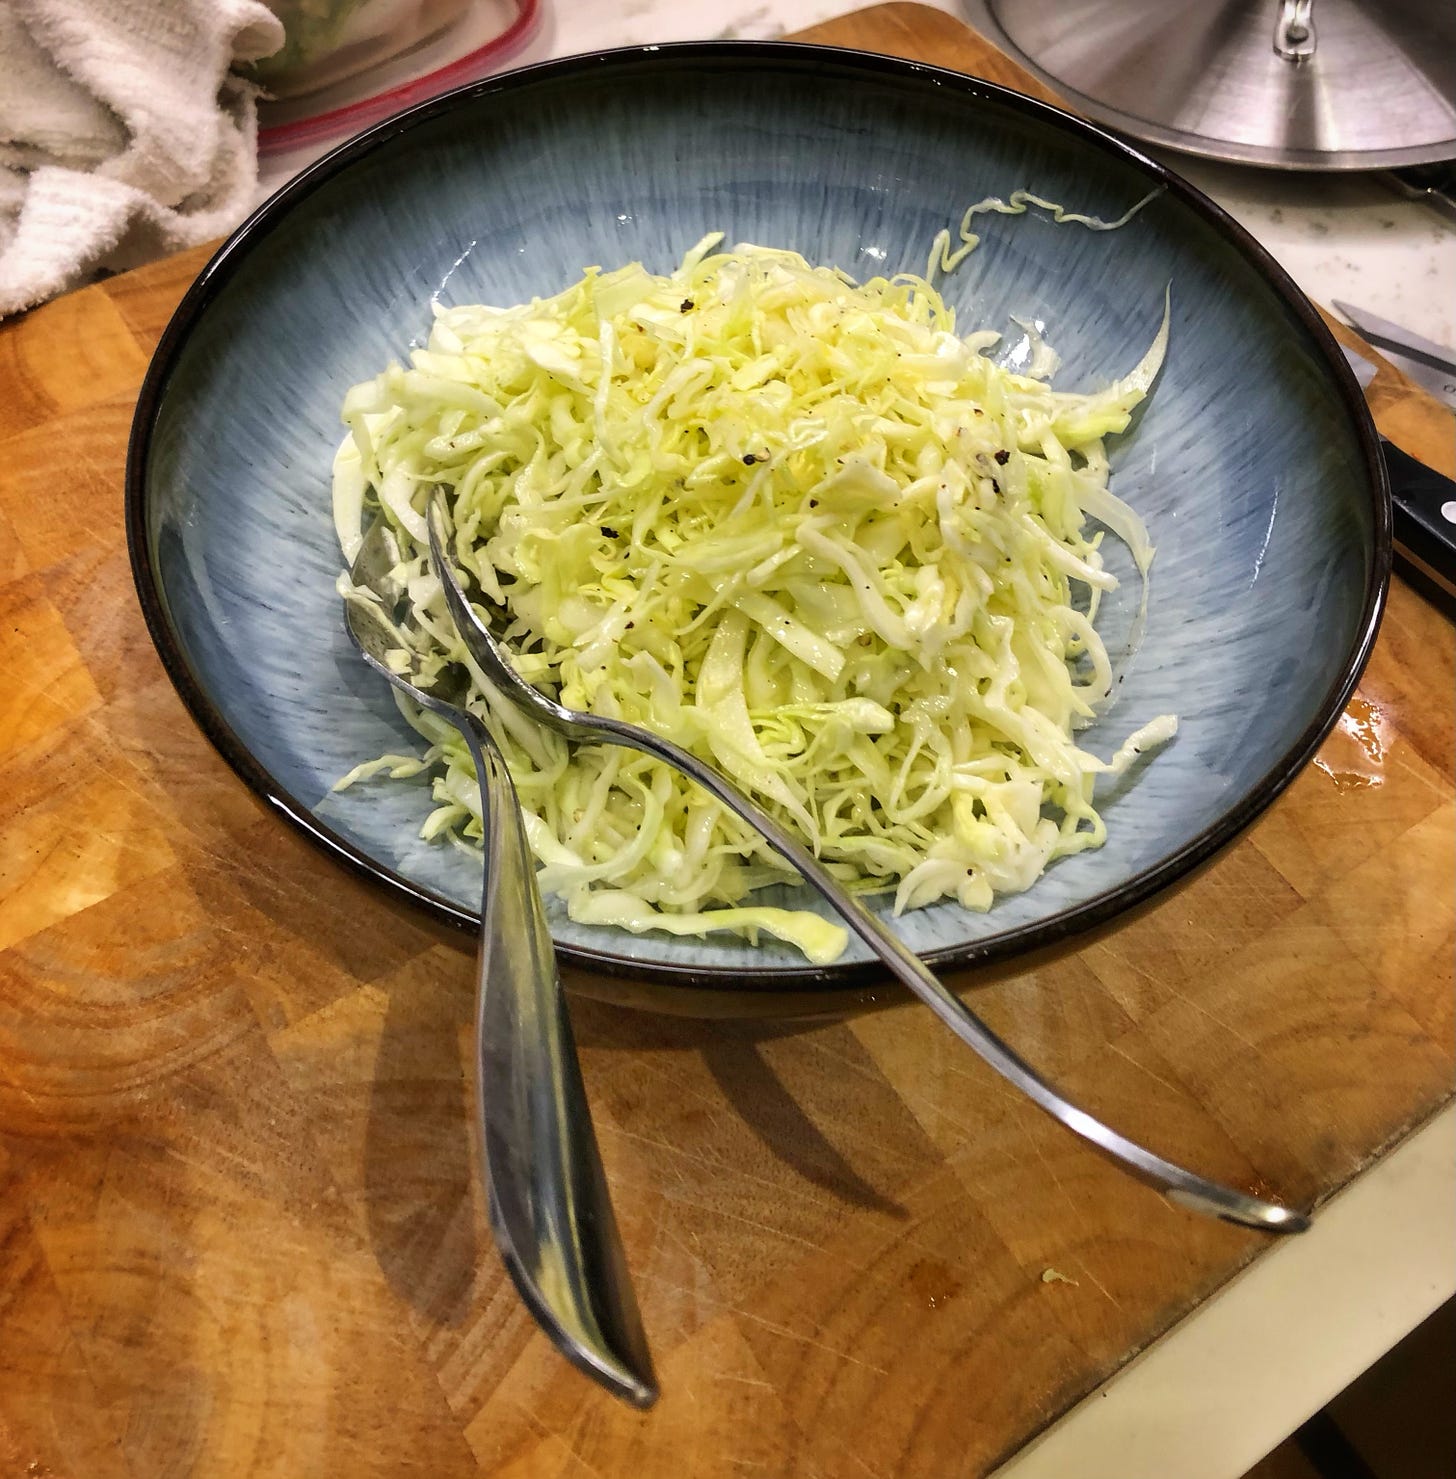 A bowl of Insalate Cappuccio - shredded cabbage, lemon juice, salt, pepper, and olive oil - on a kitchen countertop.